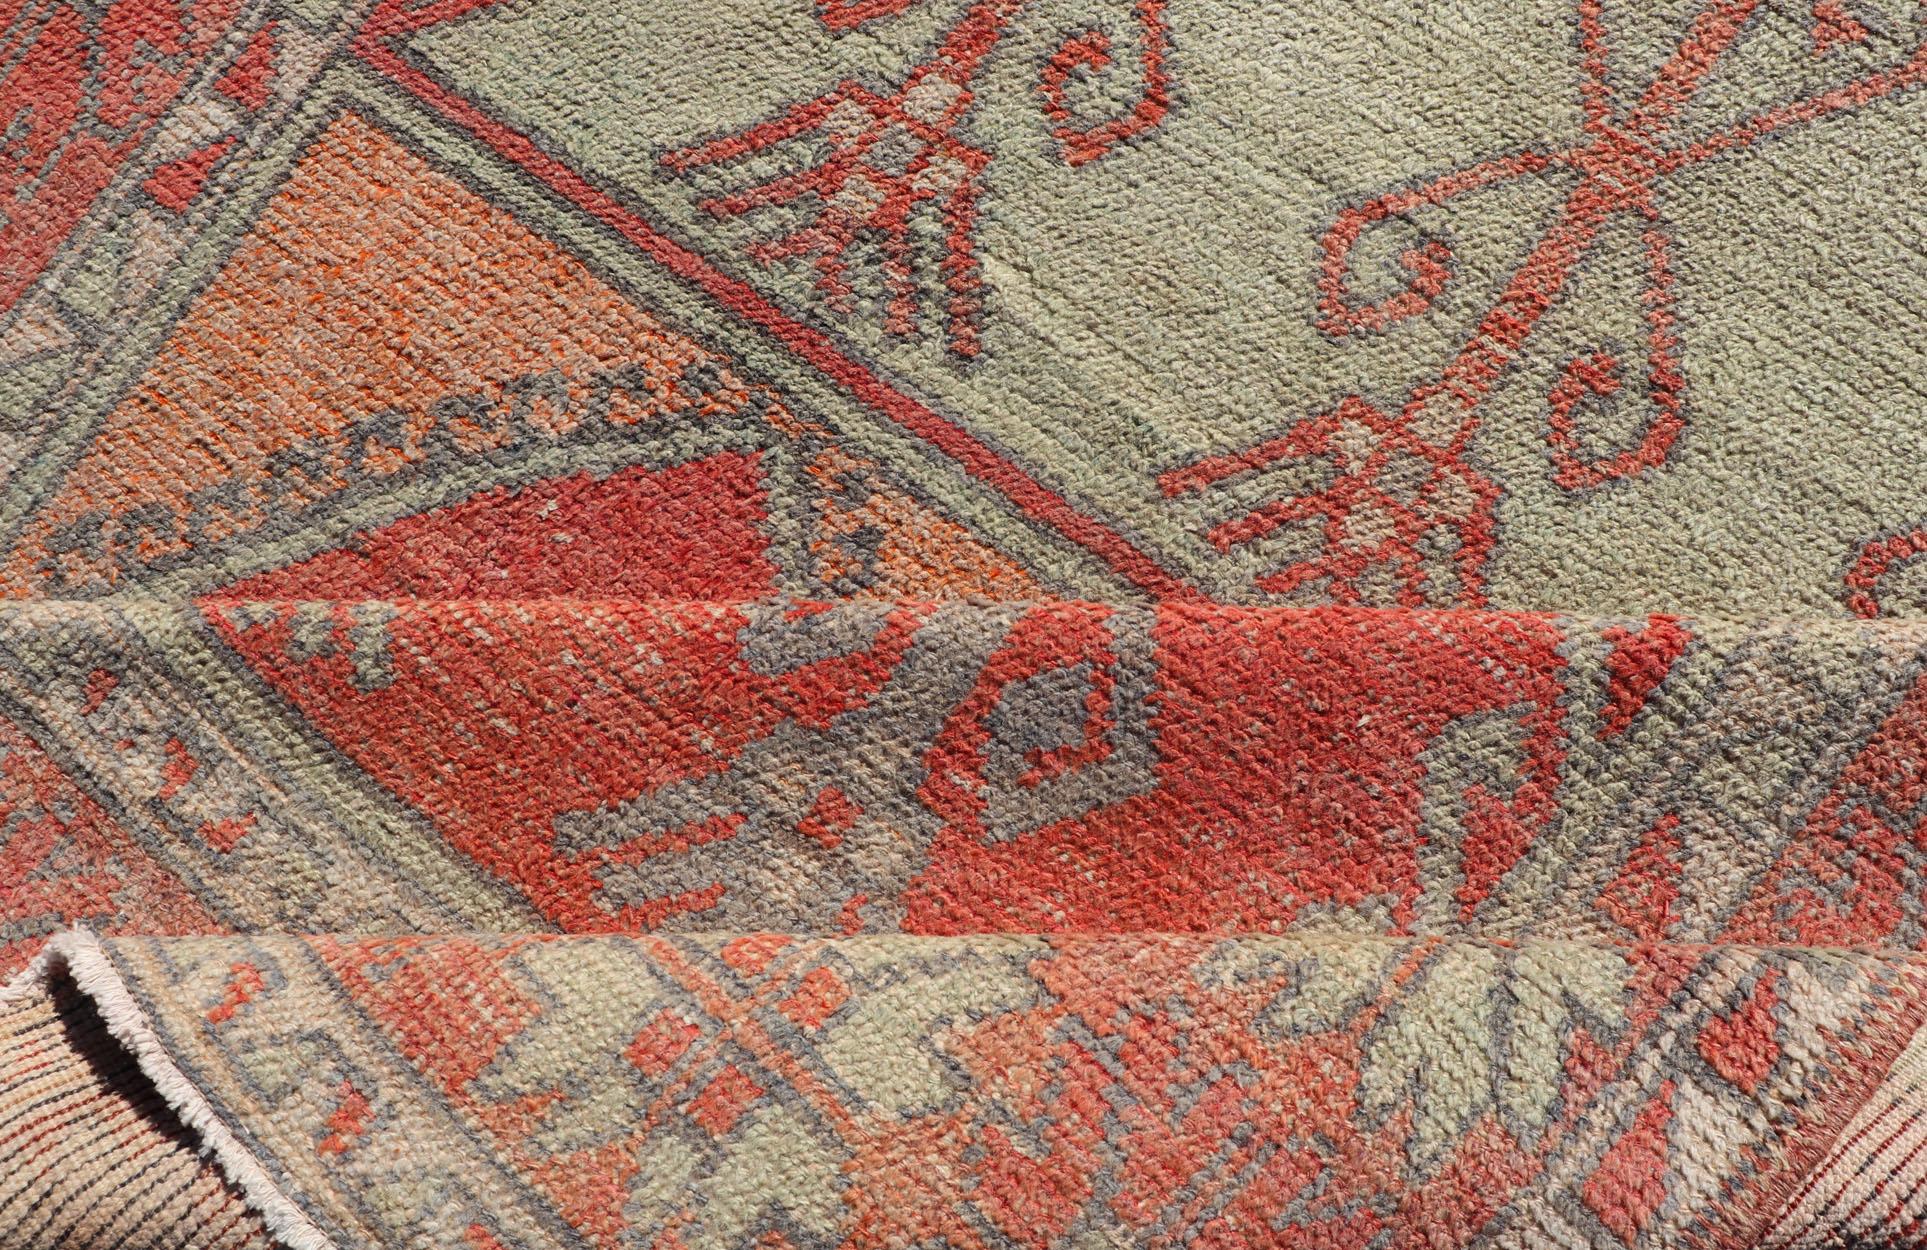 Wool Gallery Rug, Vintage Turkish in Faded Red, Coral, Orange, Soft Pink and Green For Sale